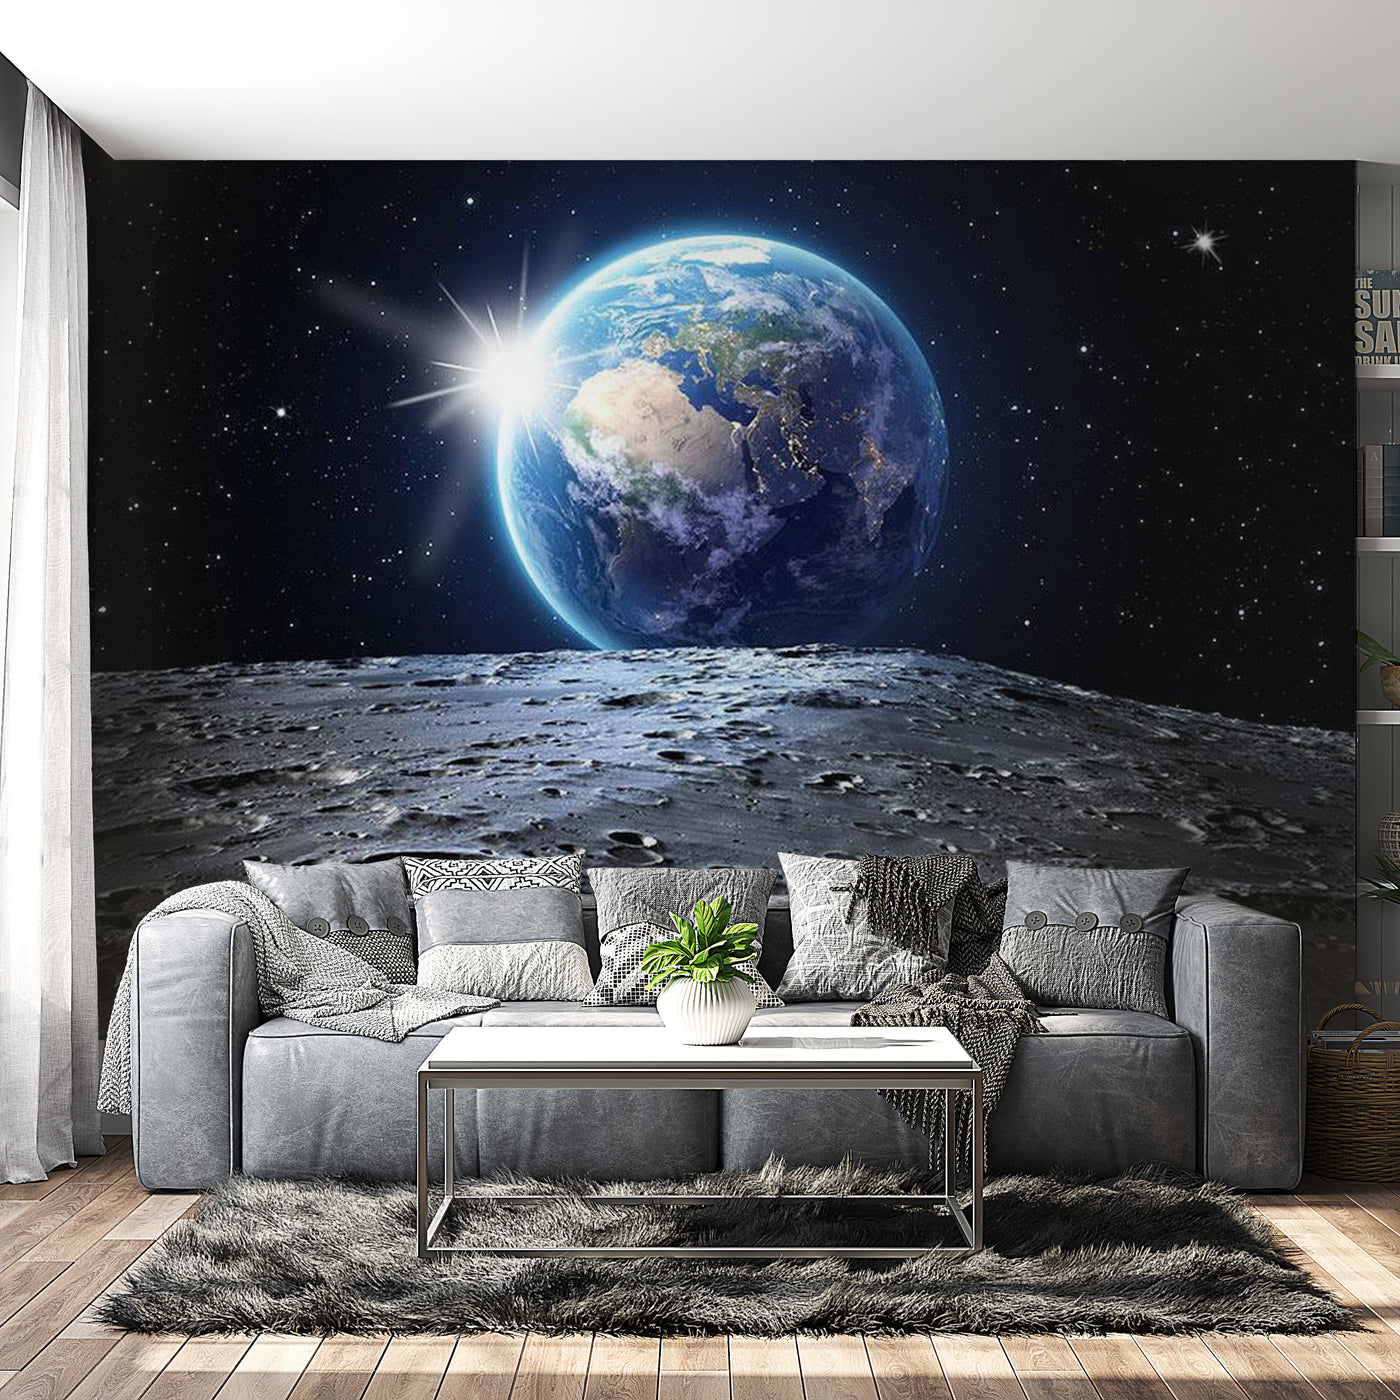 Peel & Stick Space Wall Mural - View Of The Blue Planet - Removable Wall Decals